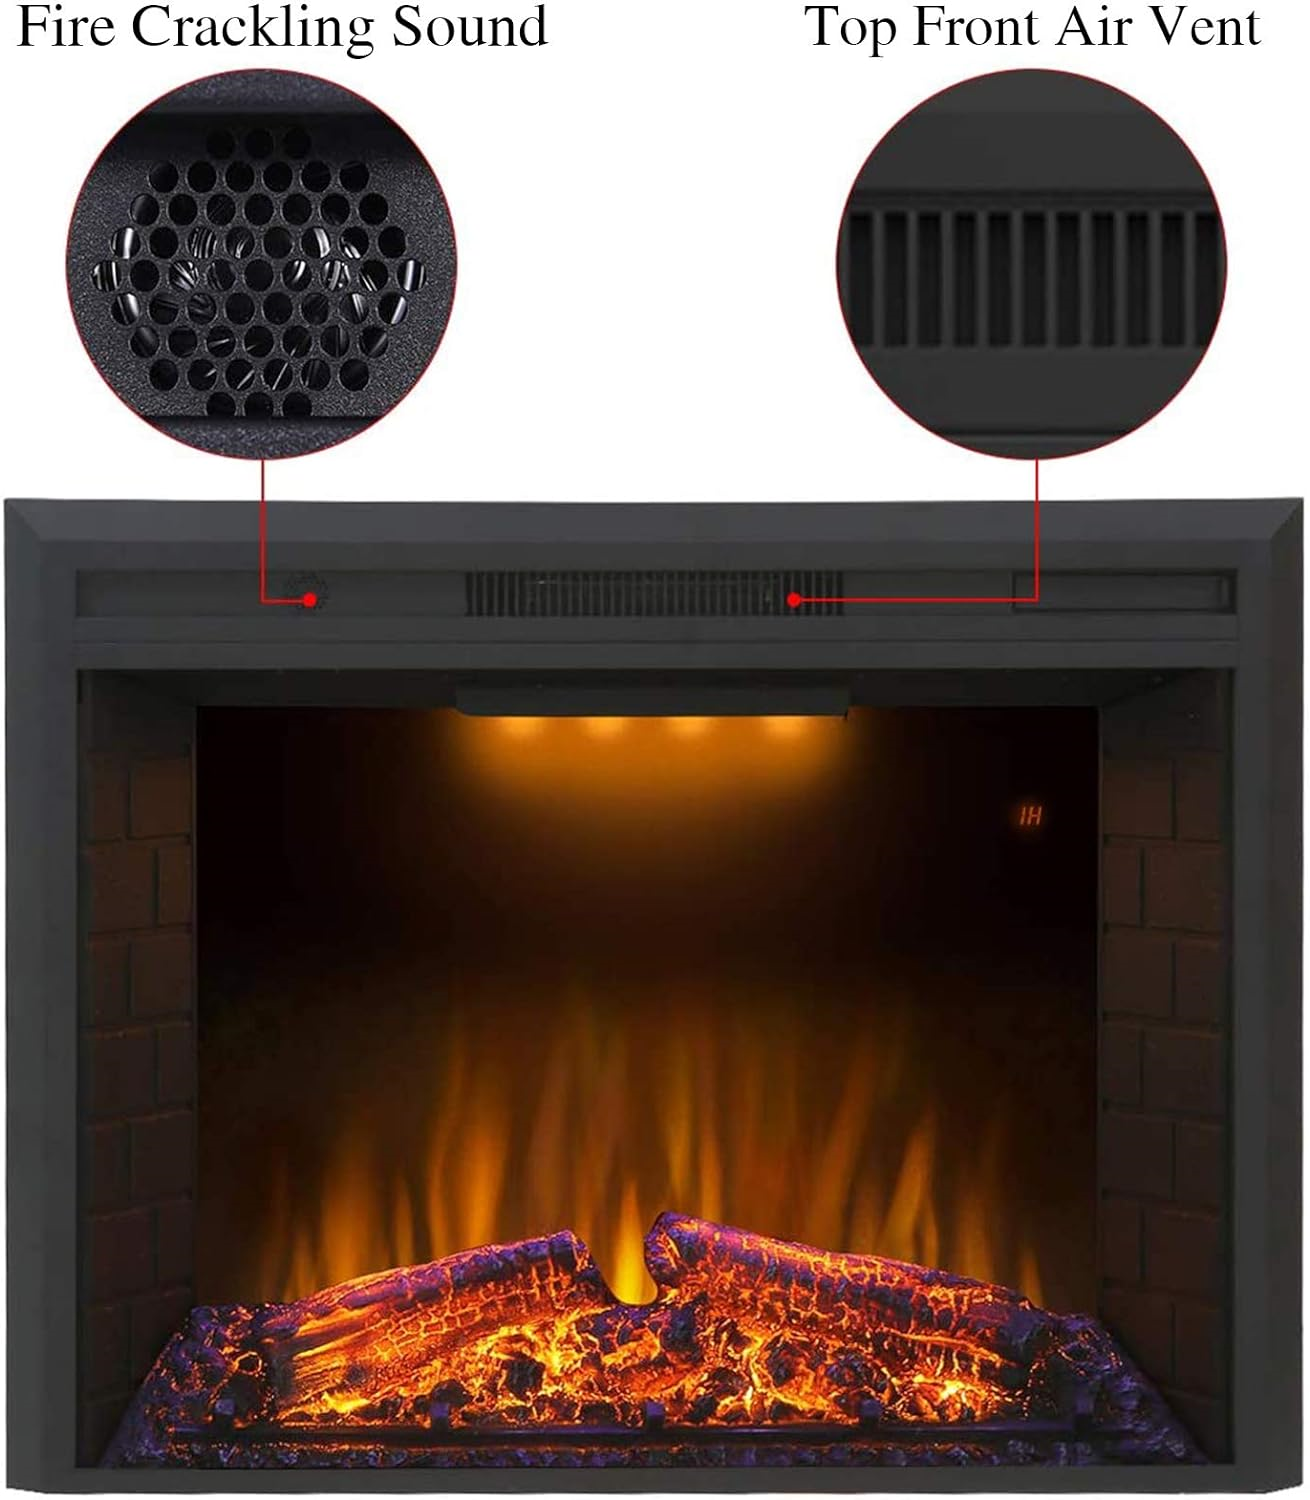 Valuxhome EF23T Electric Fireplace 23" Insert 750/1500W with Overheating Protection and Fire Crackling Sound Remote Black New